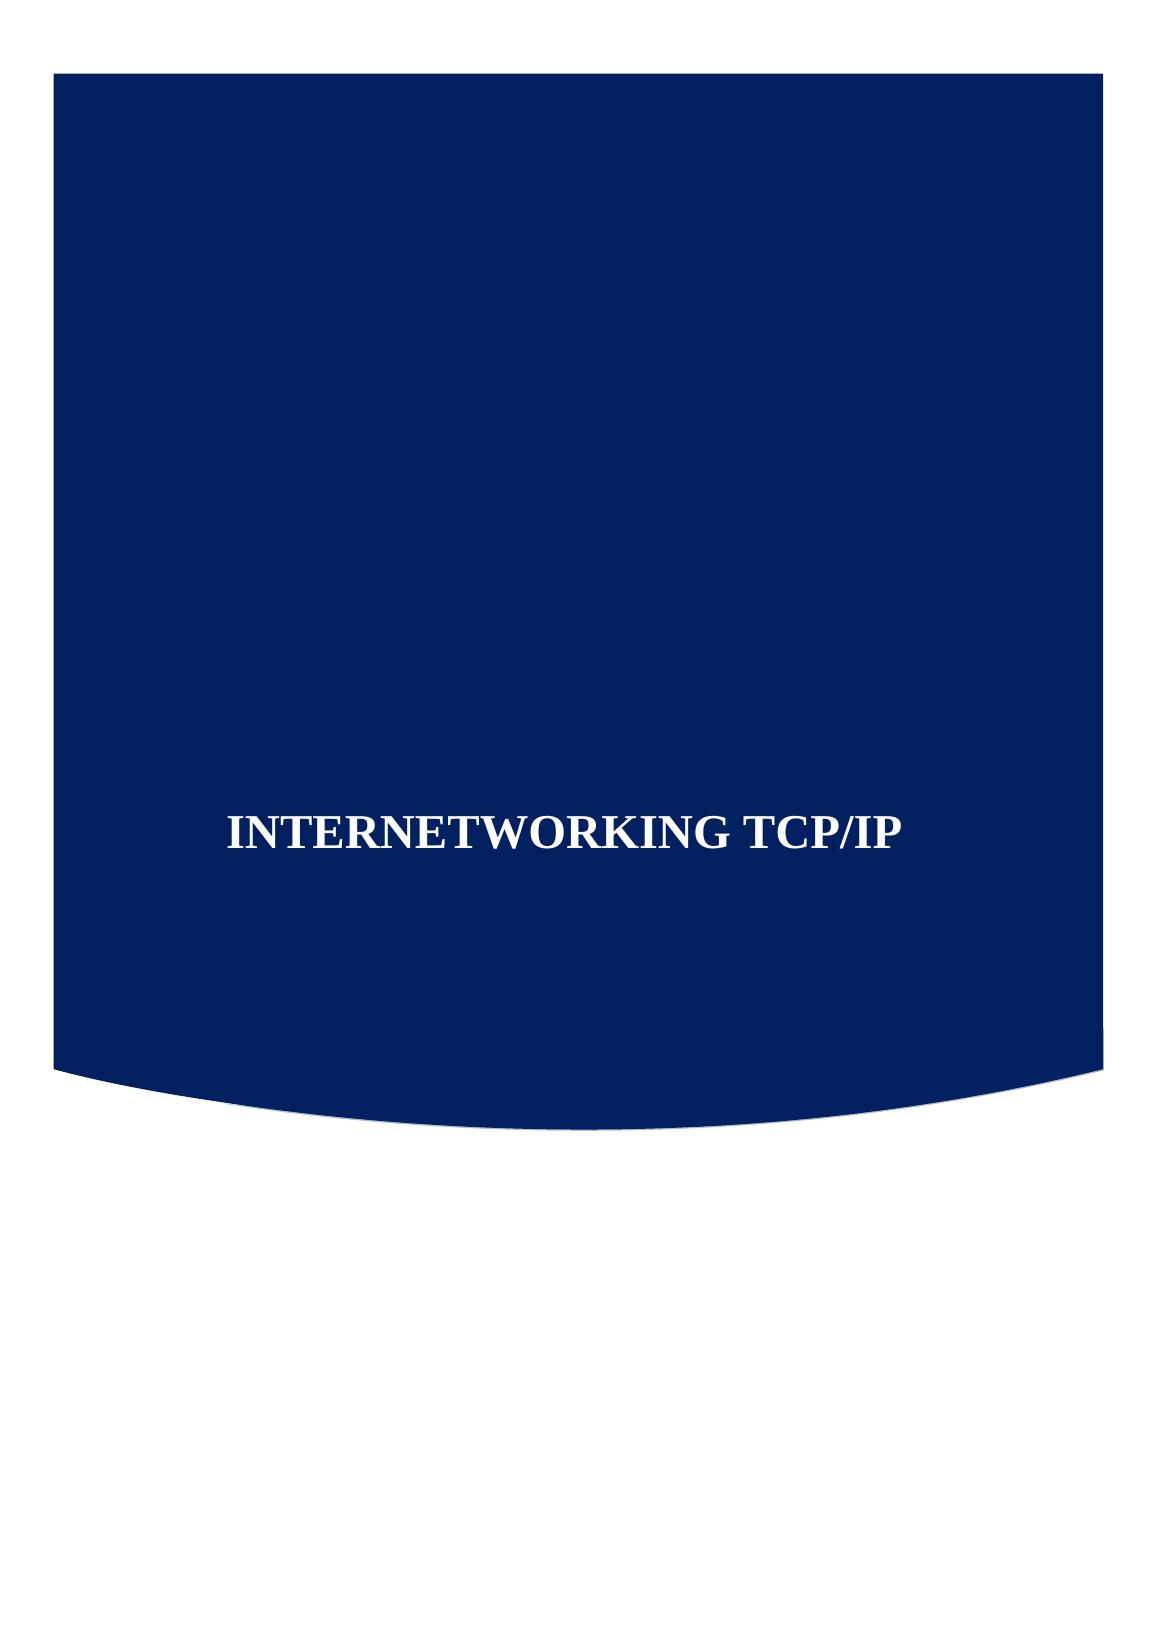 Internetworking with TCP/IP - Assignment_1